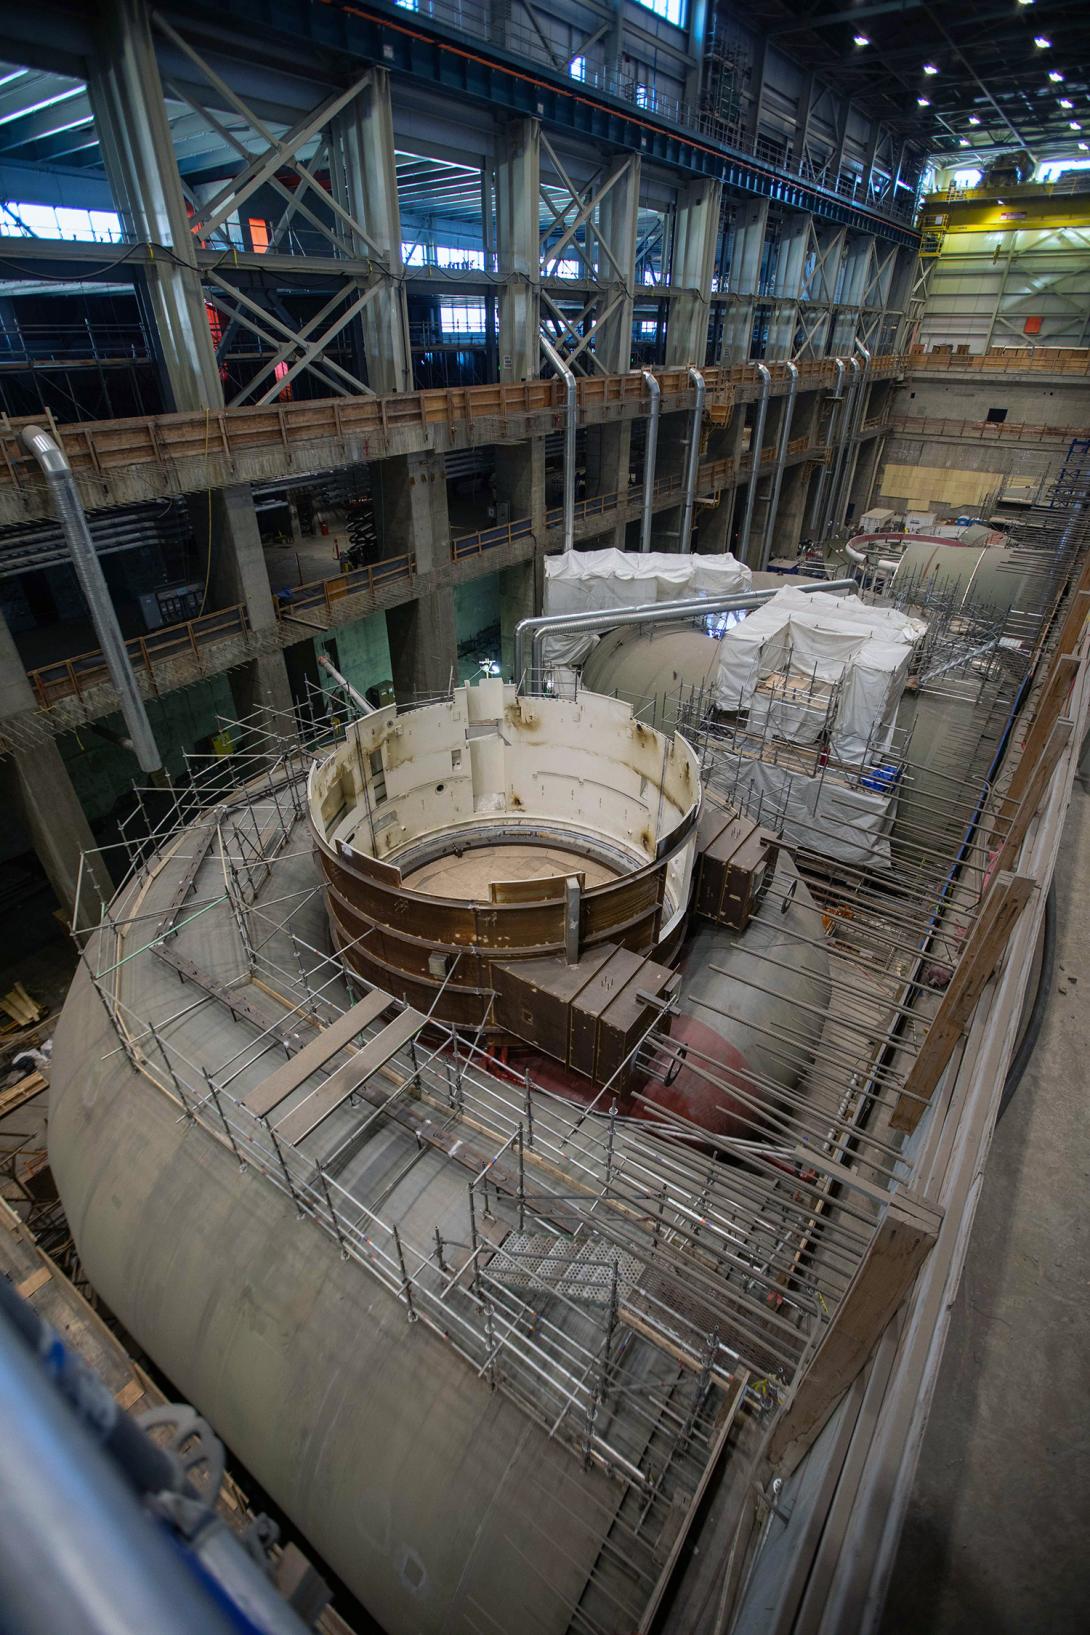 Inside the powerhouse are 6 spiral cases at various stages of completion. | February 2022